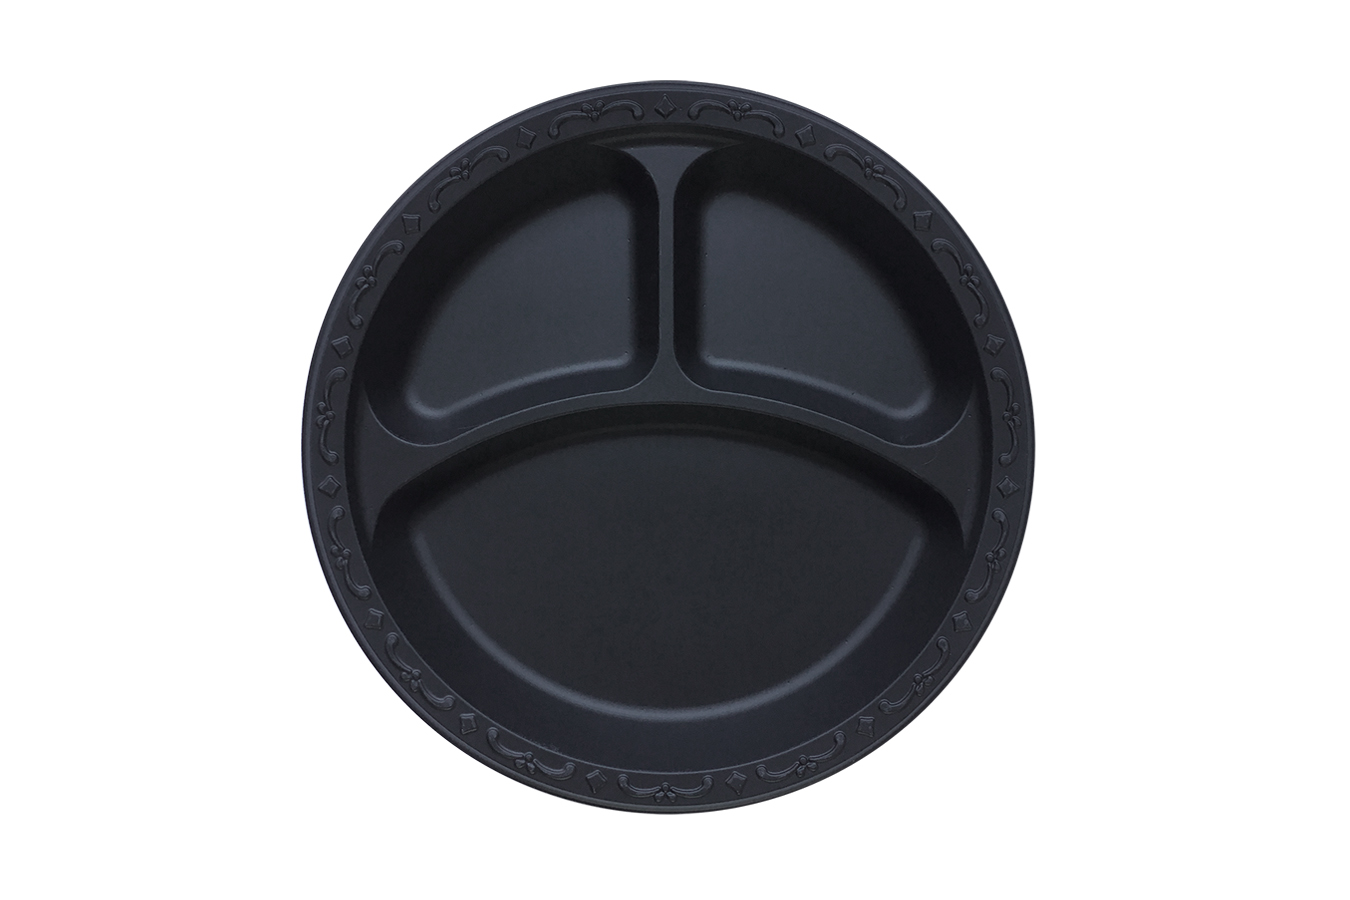 Black Polypropylene PP Plastic round 9 inches pebble box plate with 3 compartments